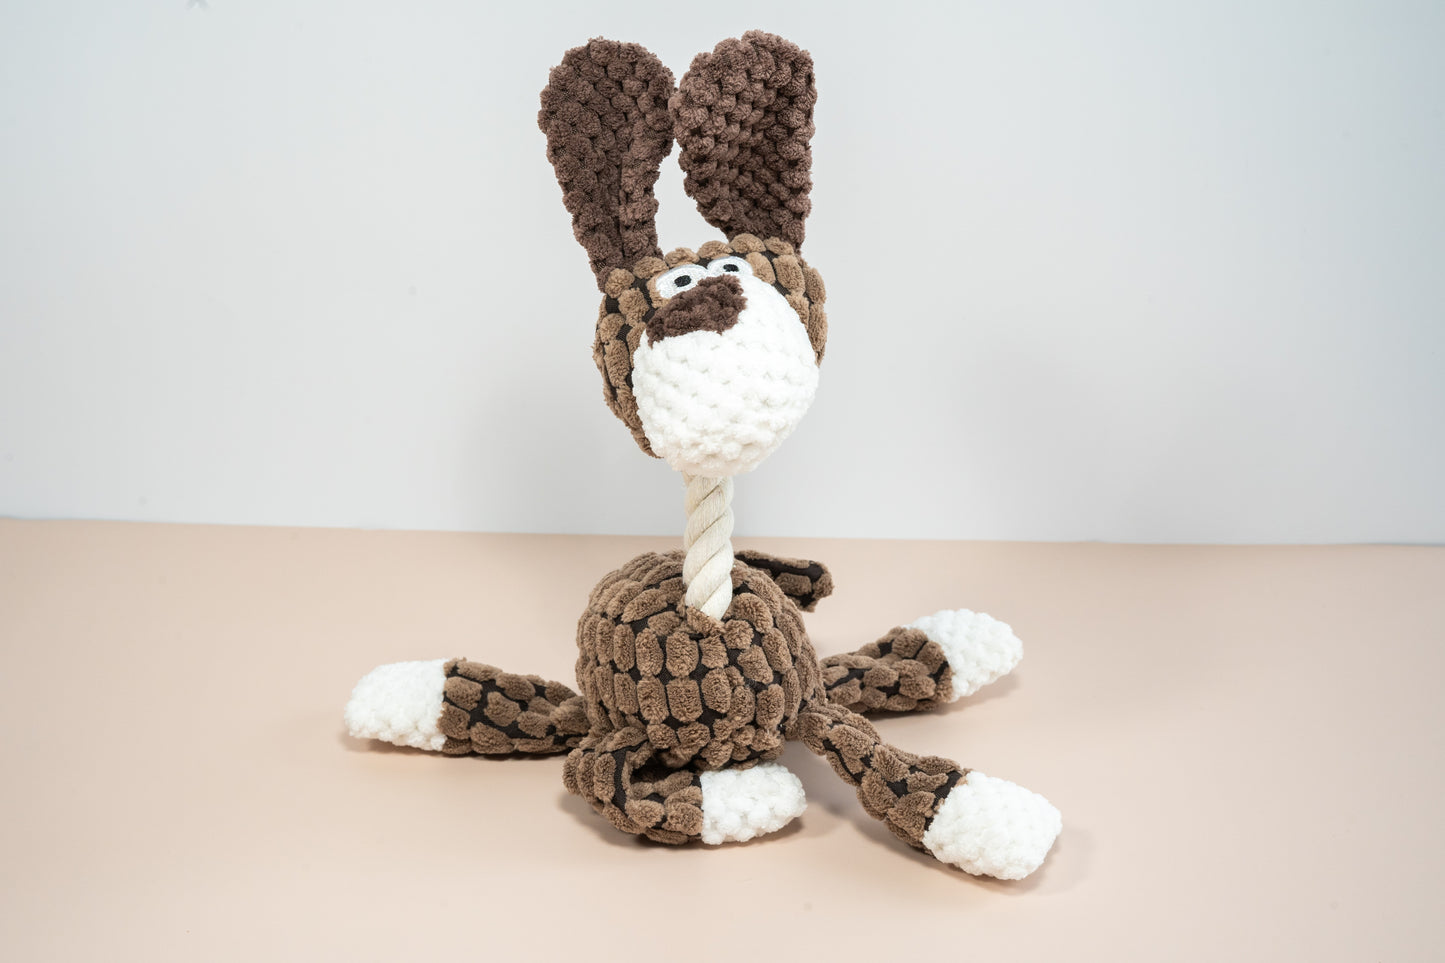 Plush dog toy in brown dog shaped with rope neck.